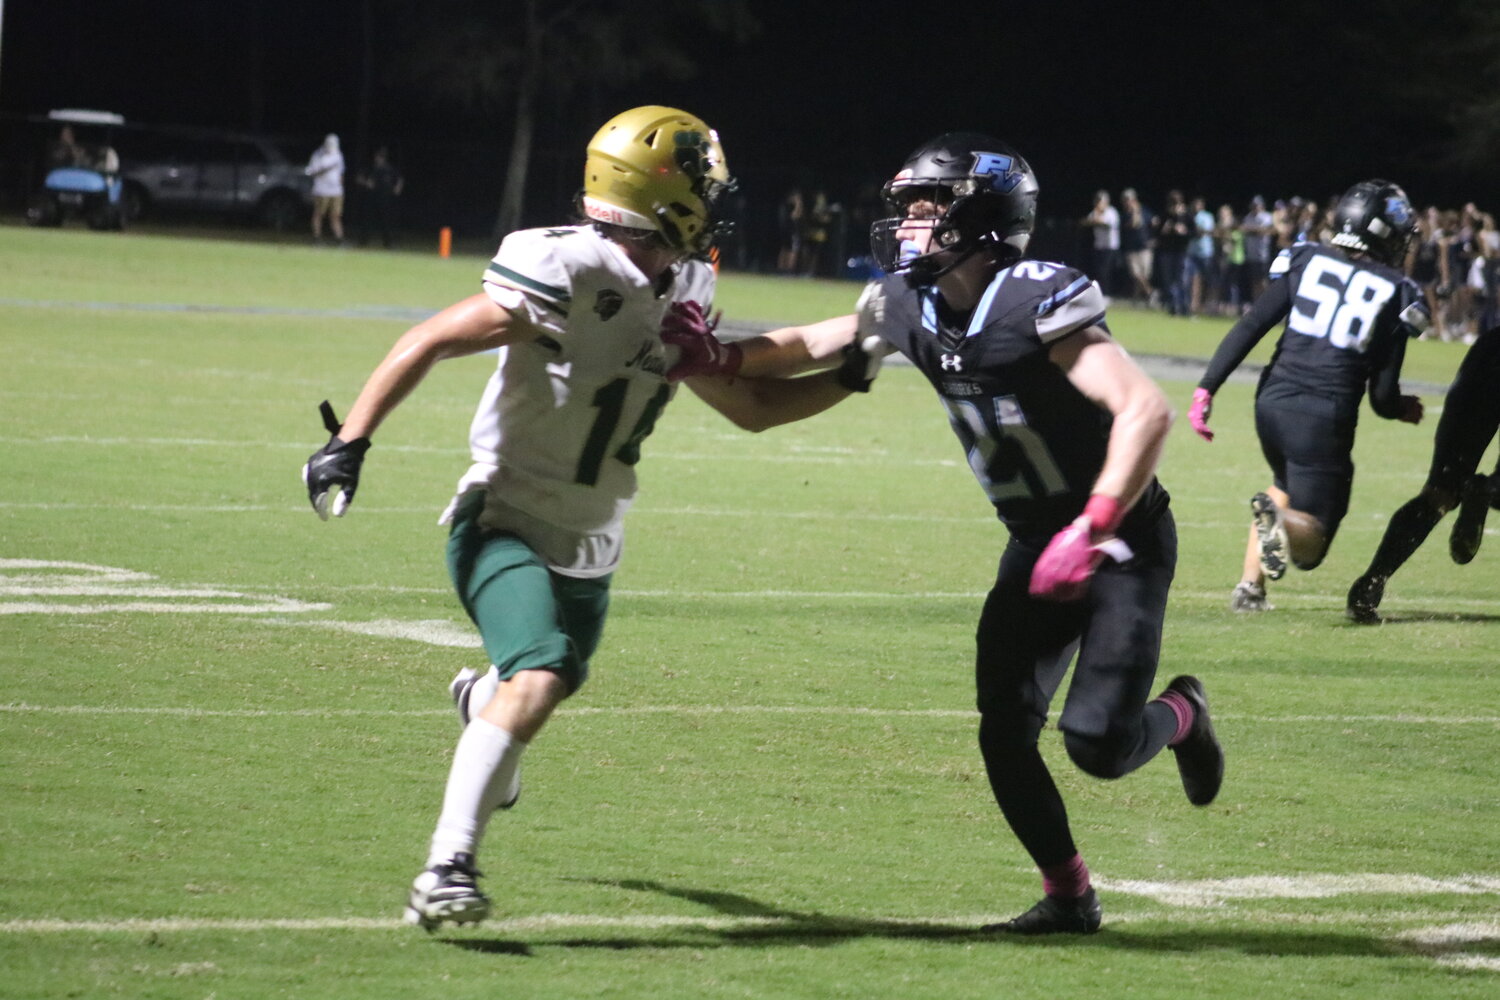 Maddox Spencer of Nease (No. 14) and Ponte Vedra’s Joe Mahoney (No. 21) presented a fun matchup to watch during the game.